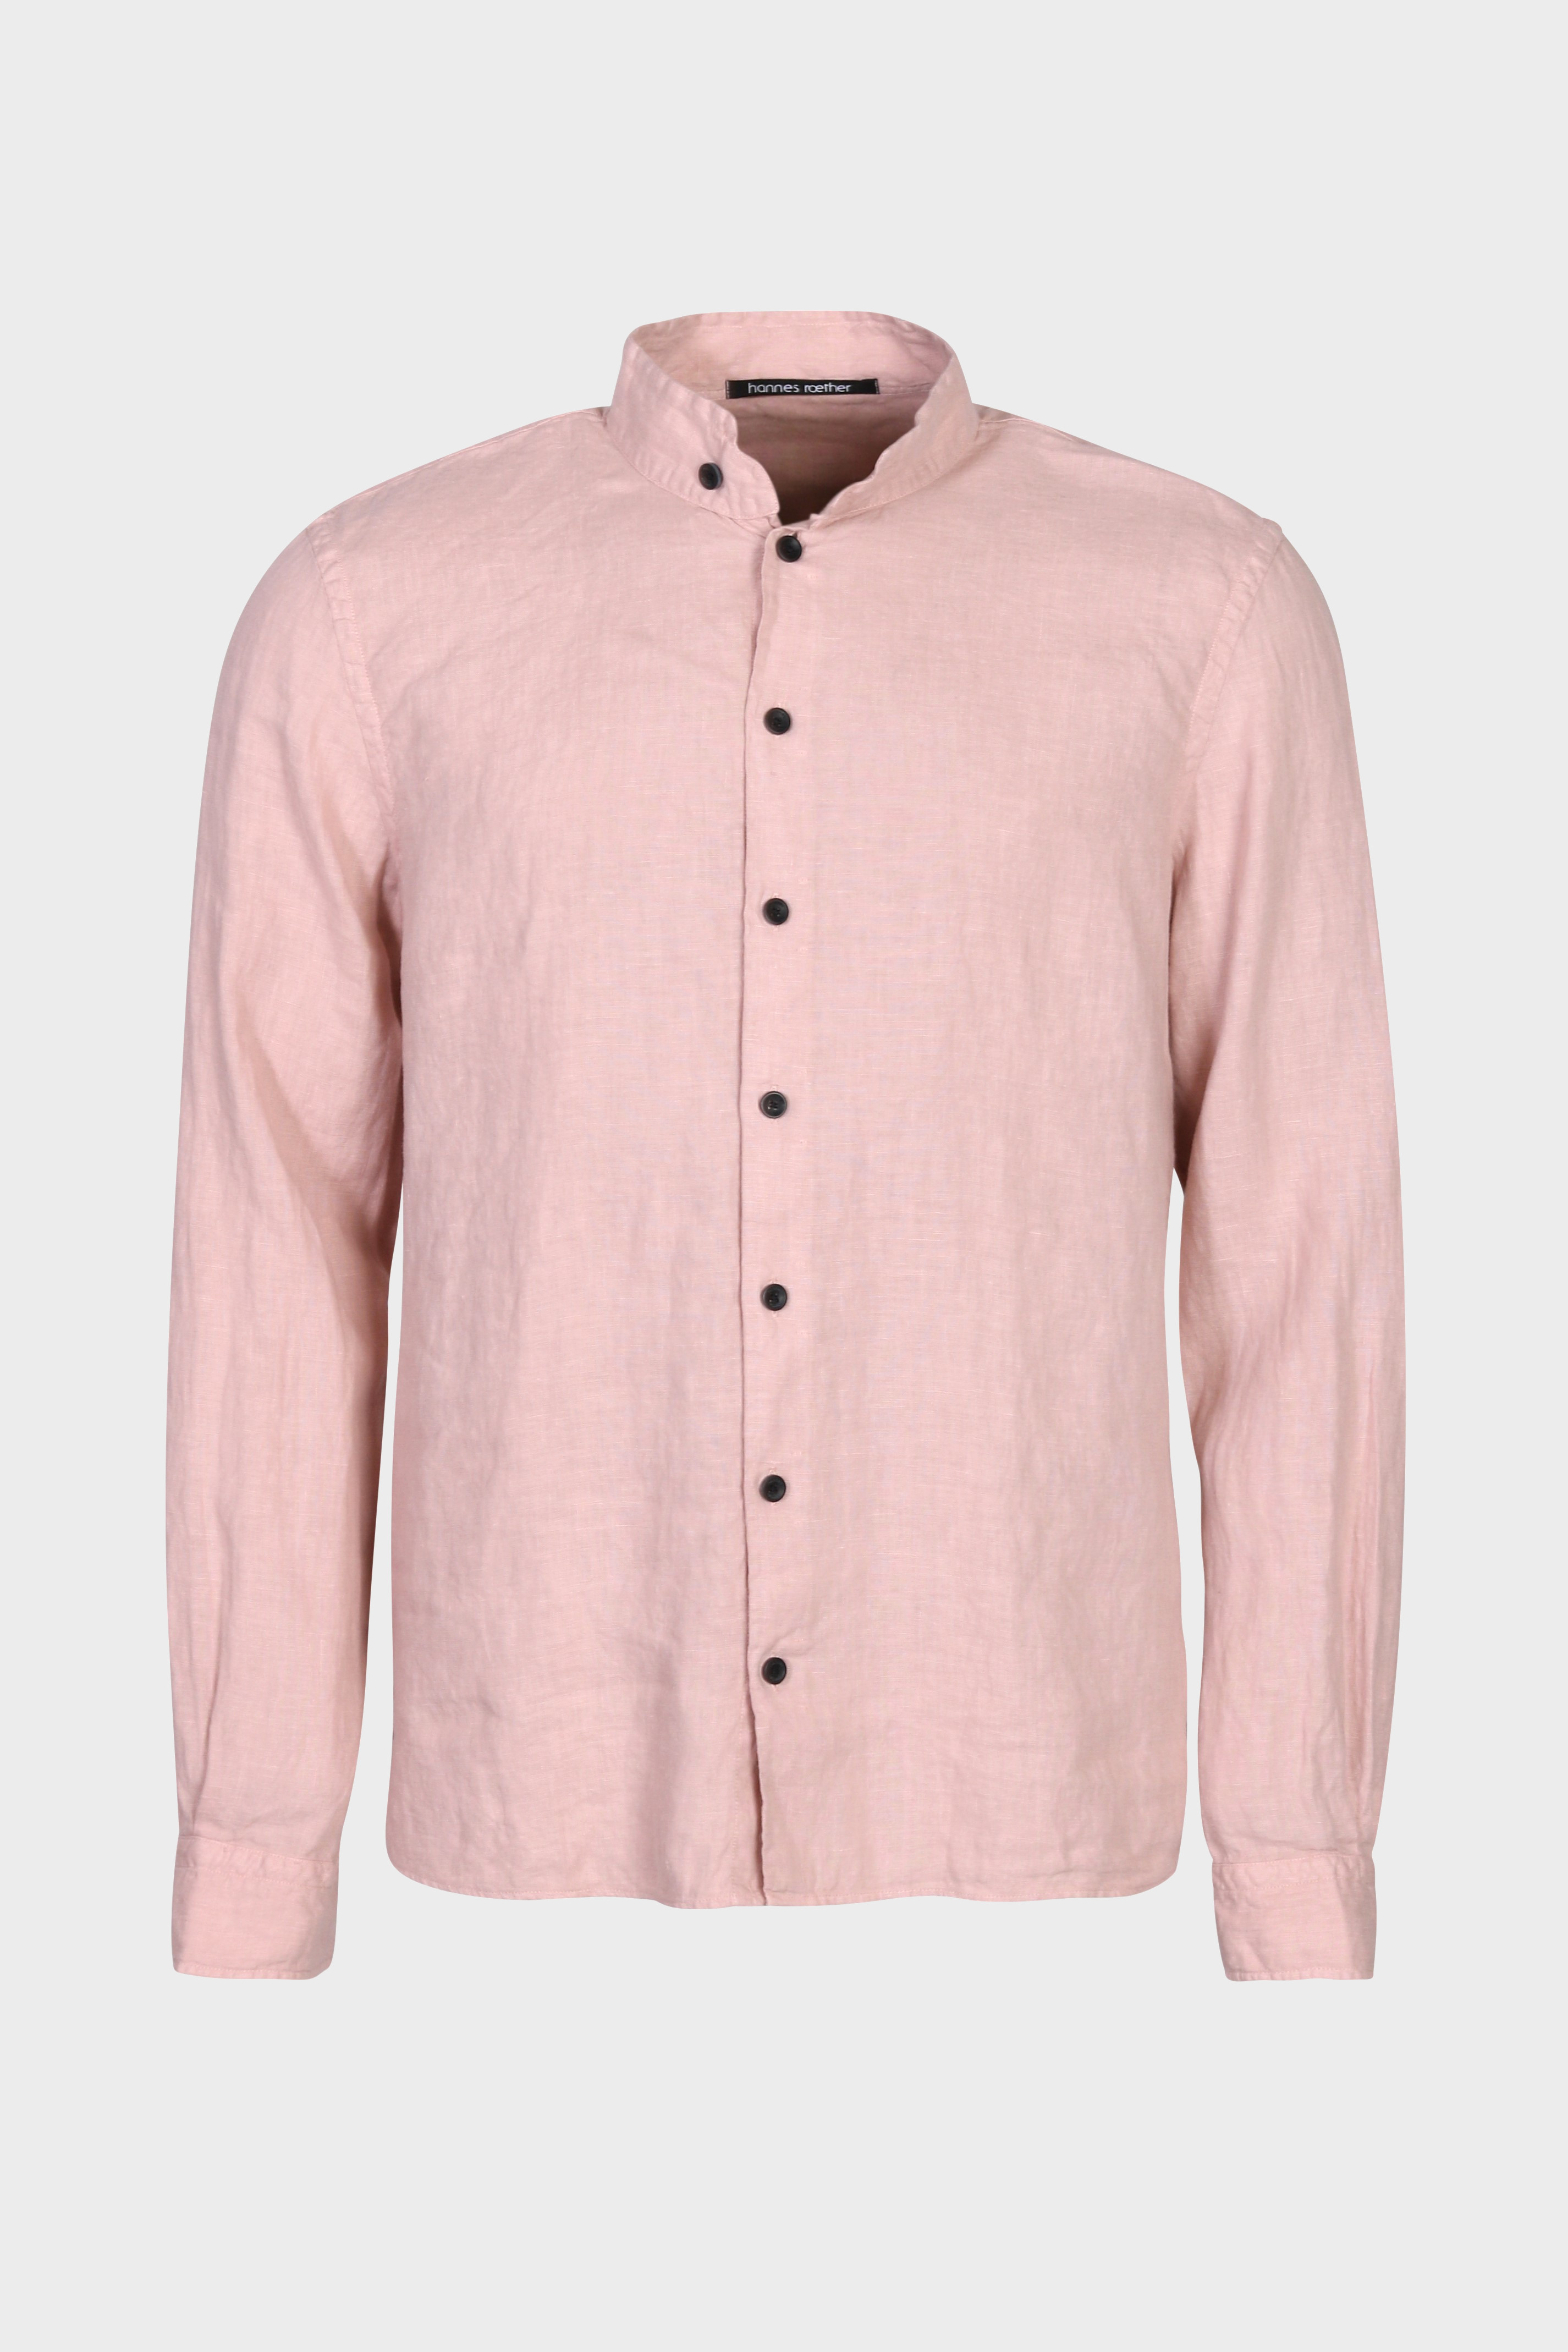 HANNES ROETHER Linen Shirt in Rosé M